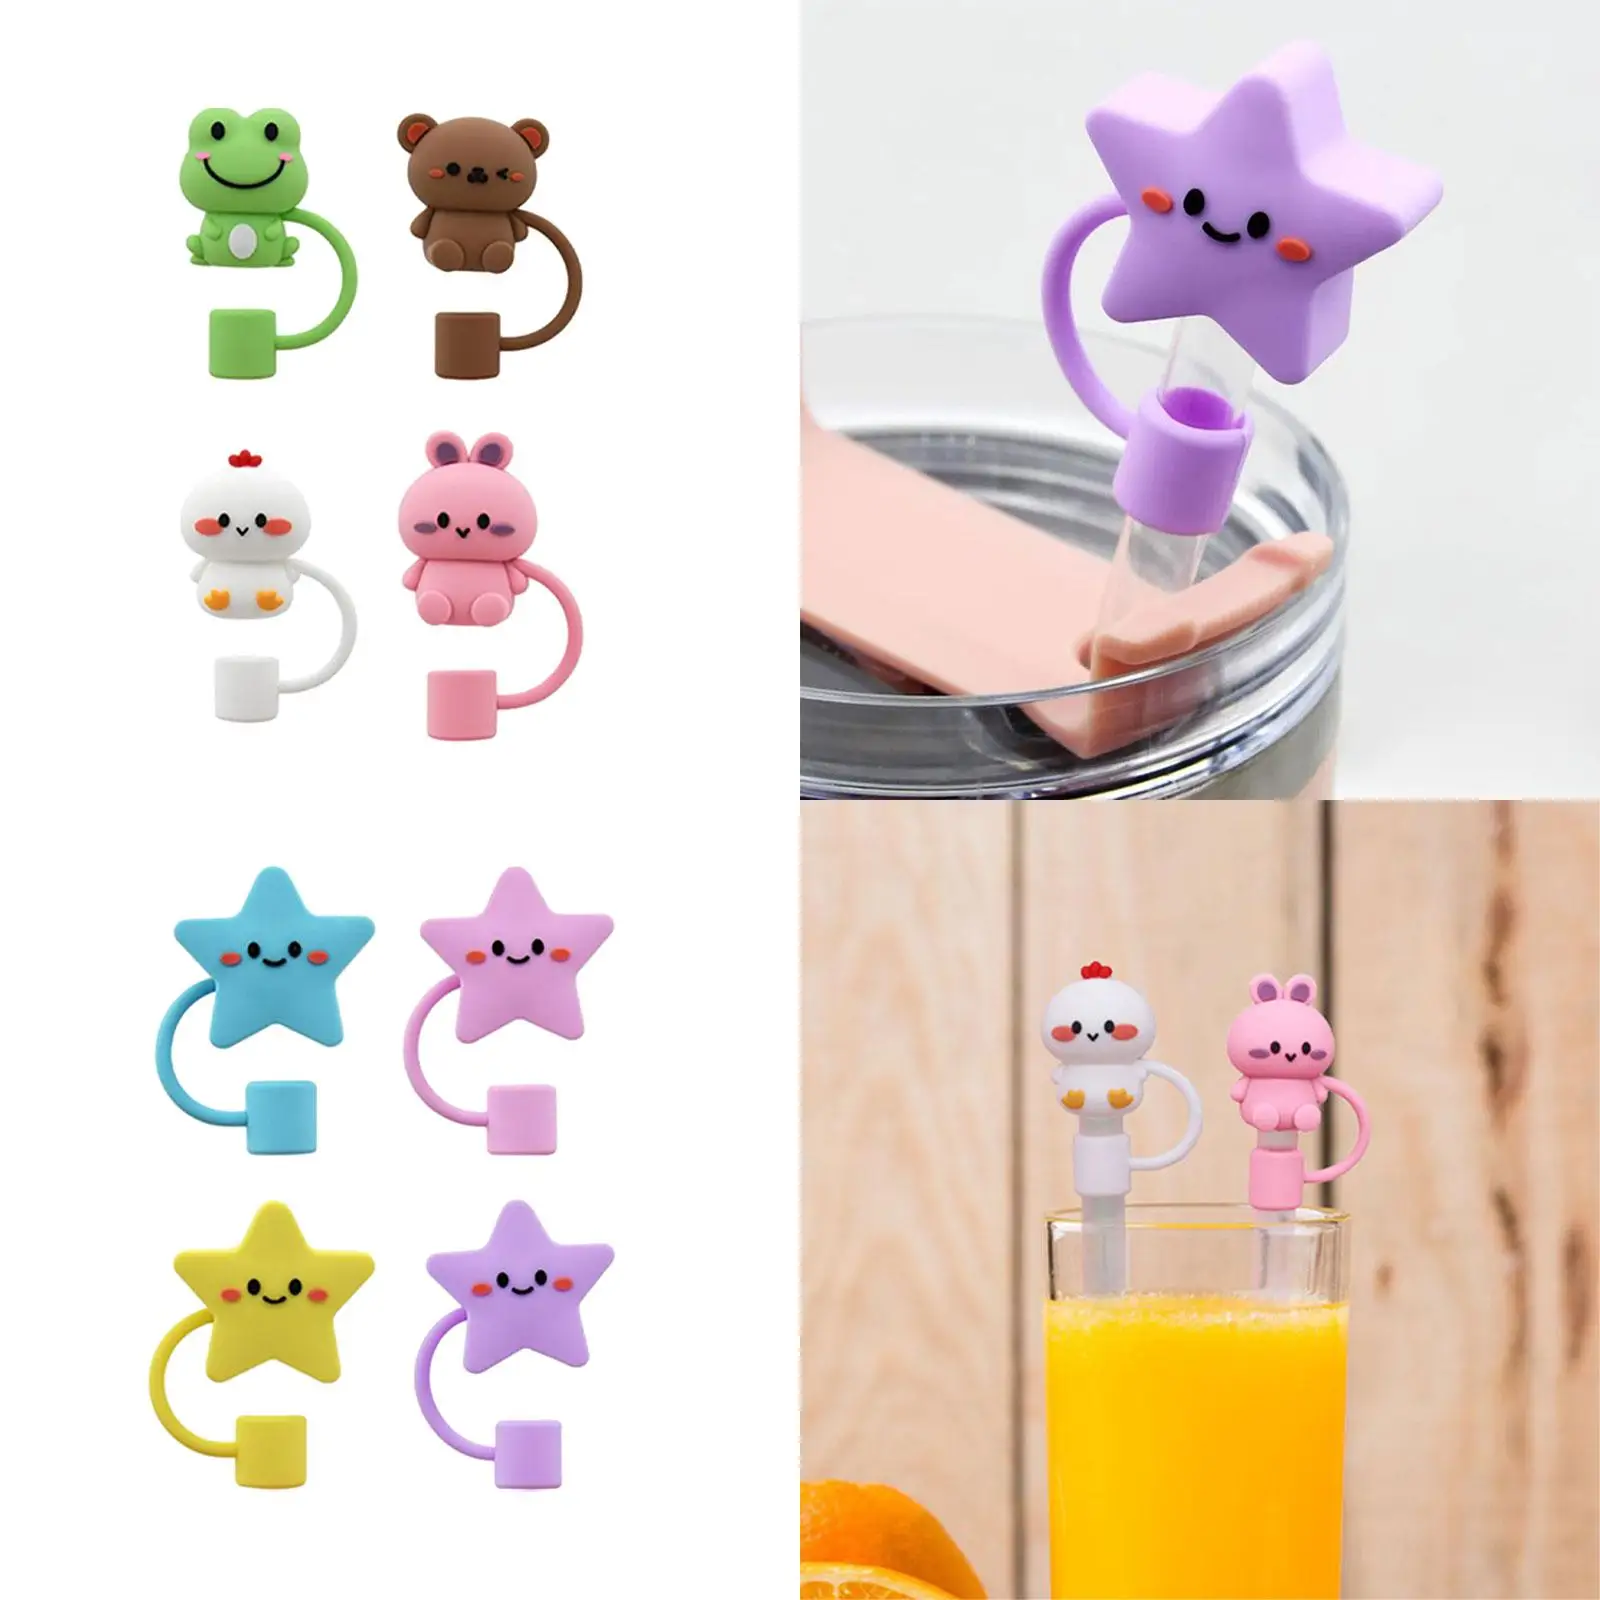 4 Pieces Straw Covers Cap Creative Cute Straw Plug Reusable Straw Lid for 10 mm Straws Portable Straw Cover Straw Protector Cap